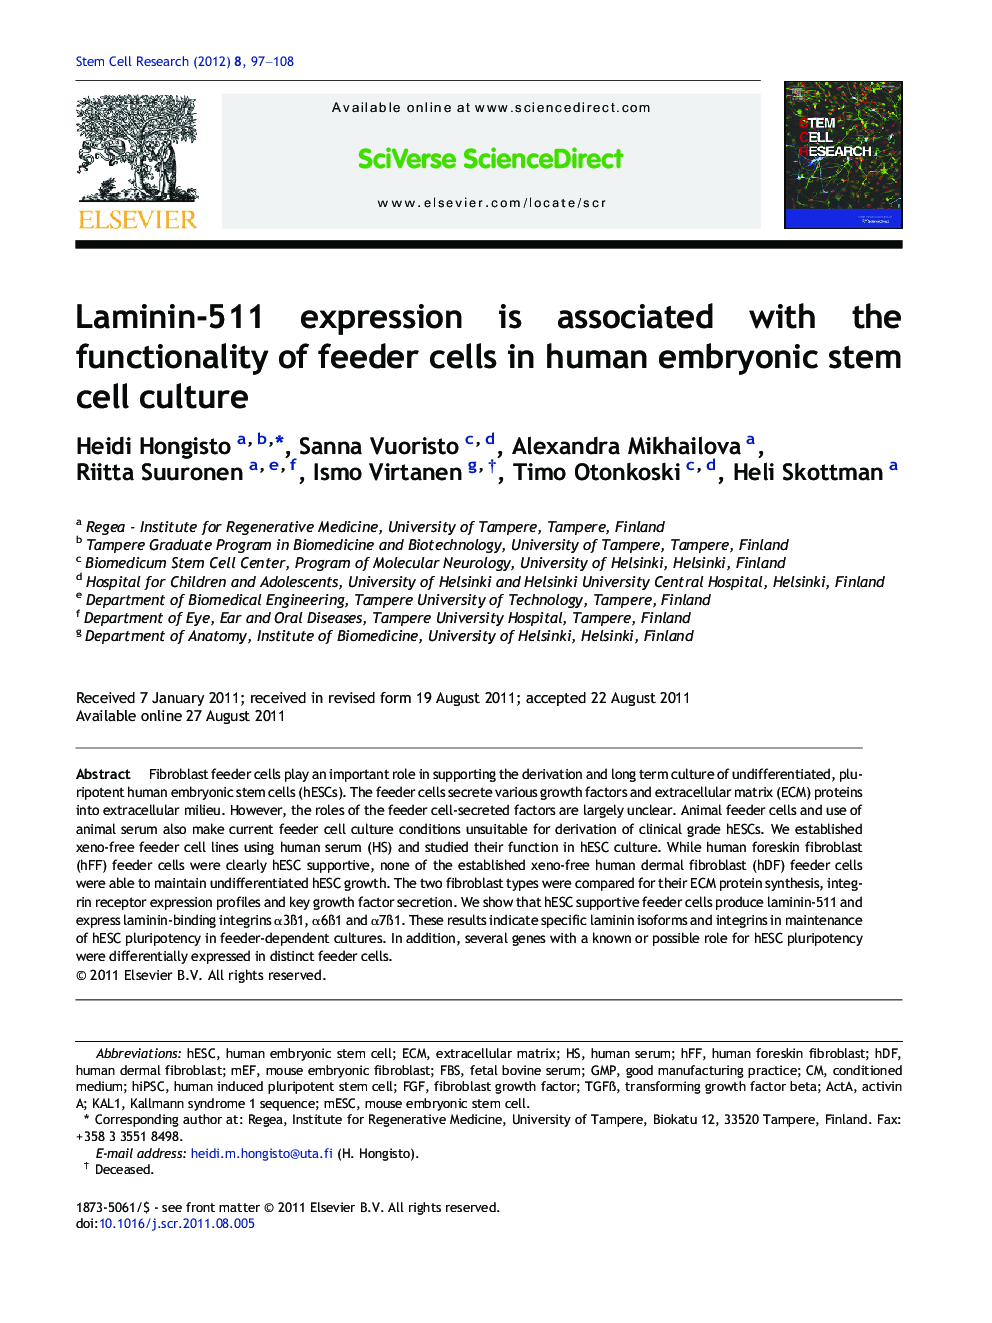 Laminin-511 expression is associated with the functionality of feeder cells in human embryonic stem cell culture